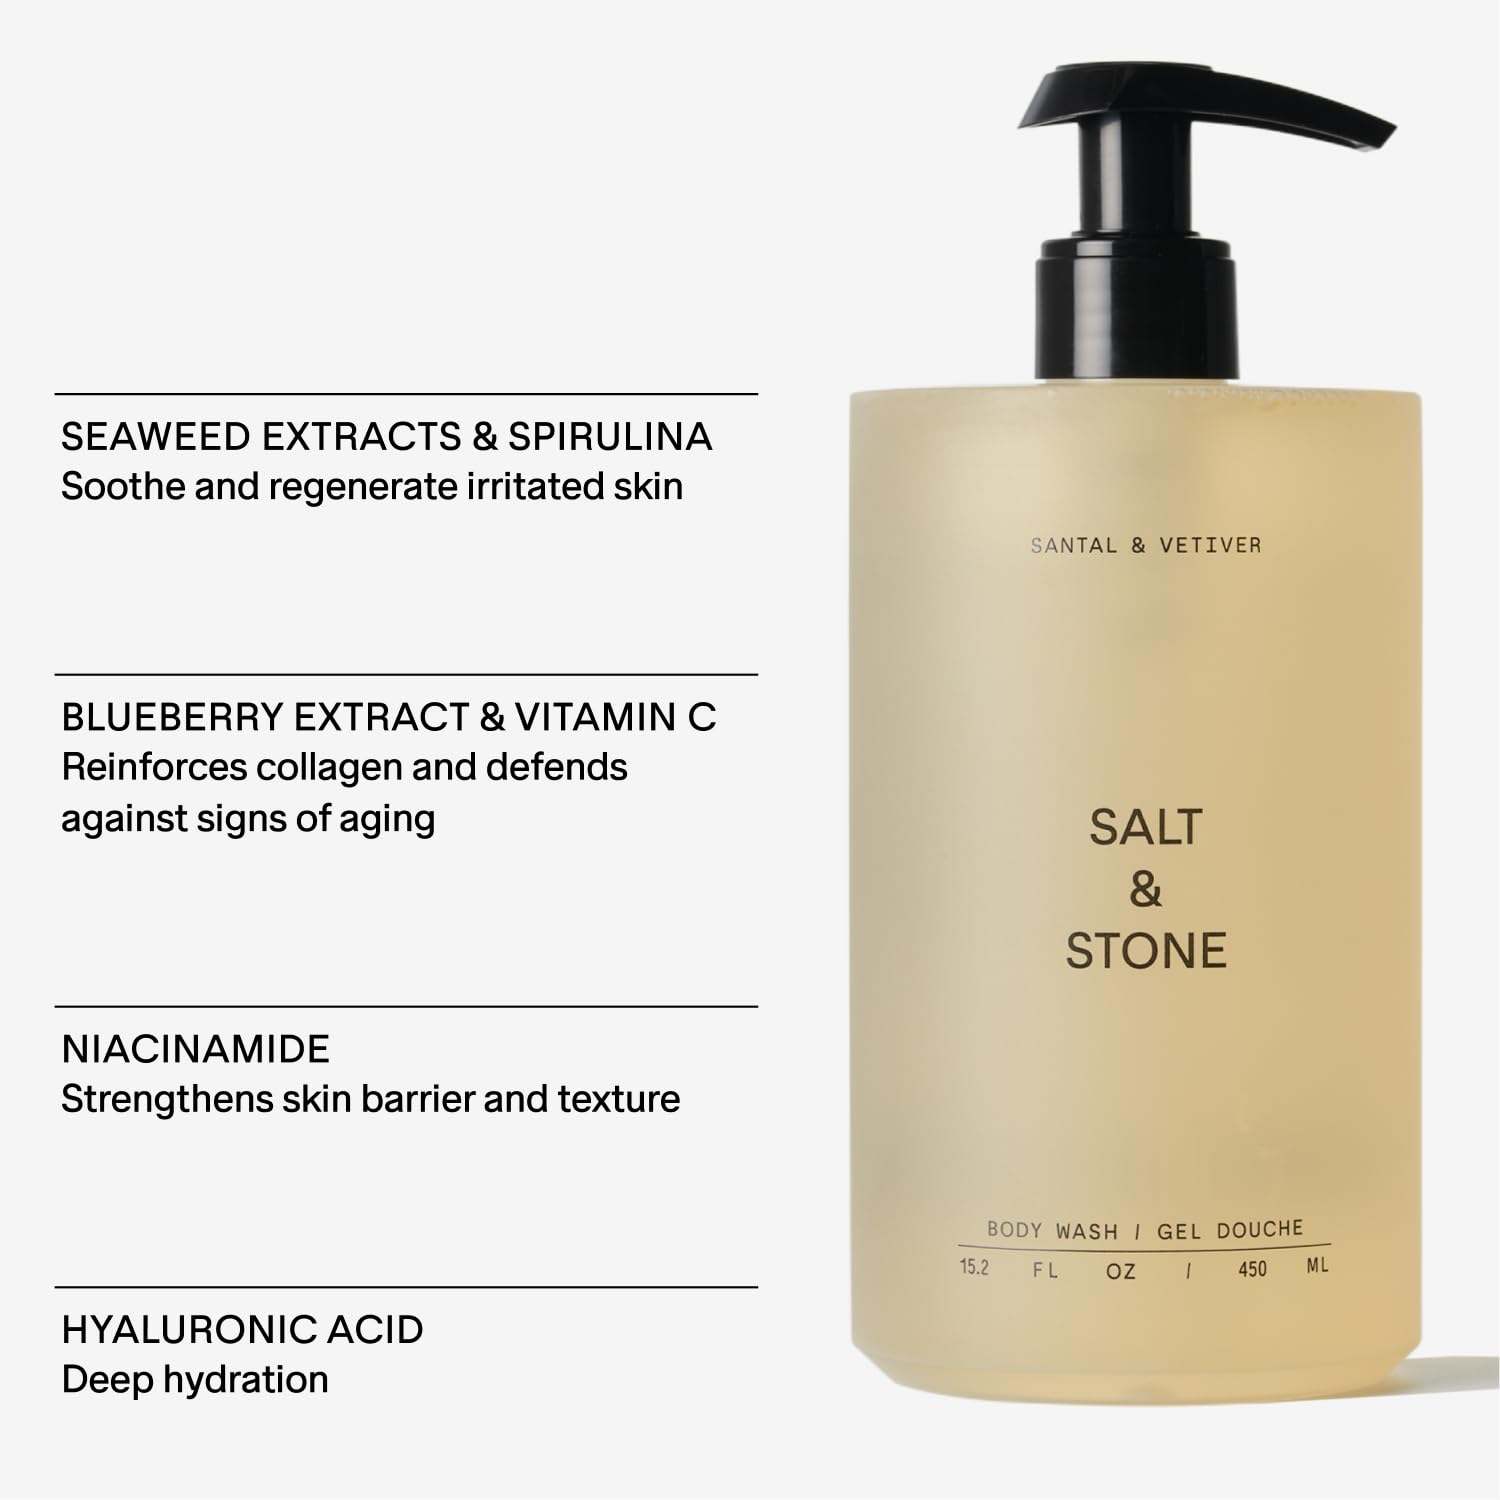 SALT & STONE Antioxidant-Rich Body Wash - Santal & Vetiver | Cleanse, Nourish & Soften Skin with Niacinamide & Hyaluronic Acid | Free From Parabens, Sulfates & Phthalates (15.2 fl oz) : Beauty & Personal Care